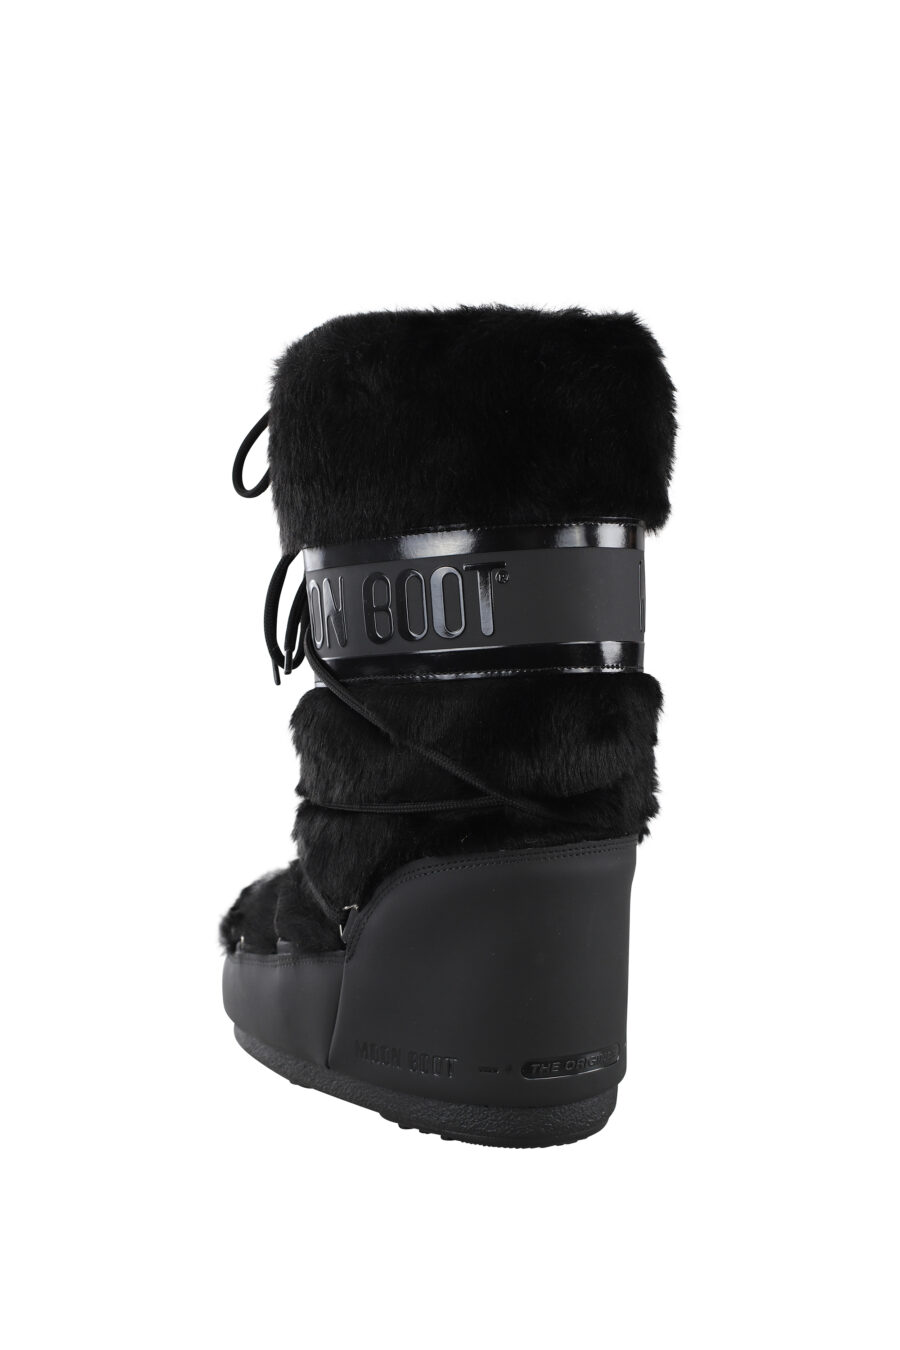 Black snow boots with monochrome logo - IMG 6794